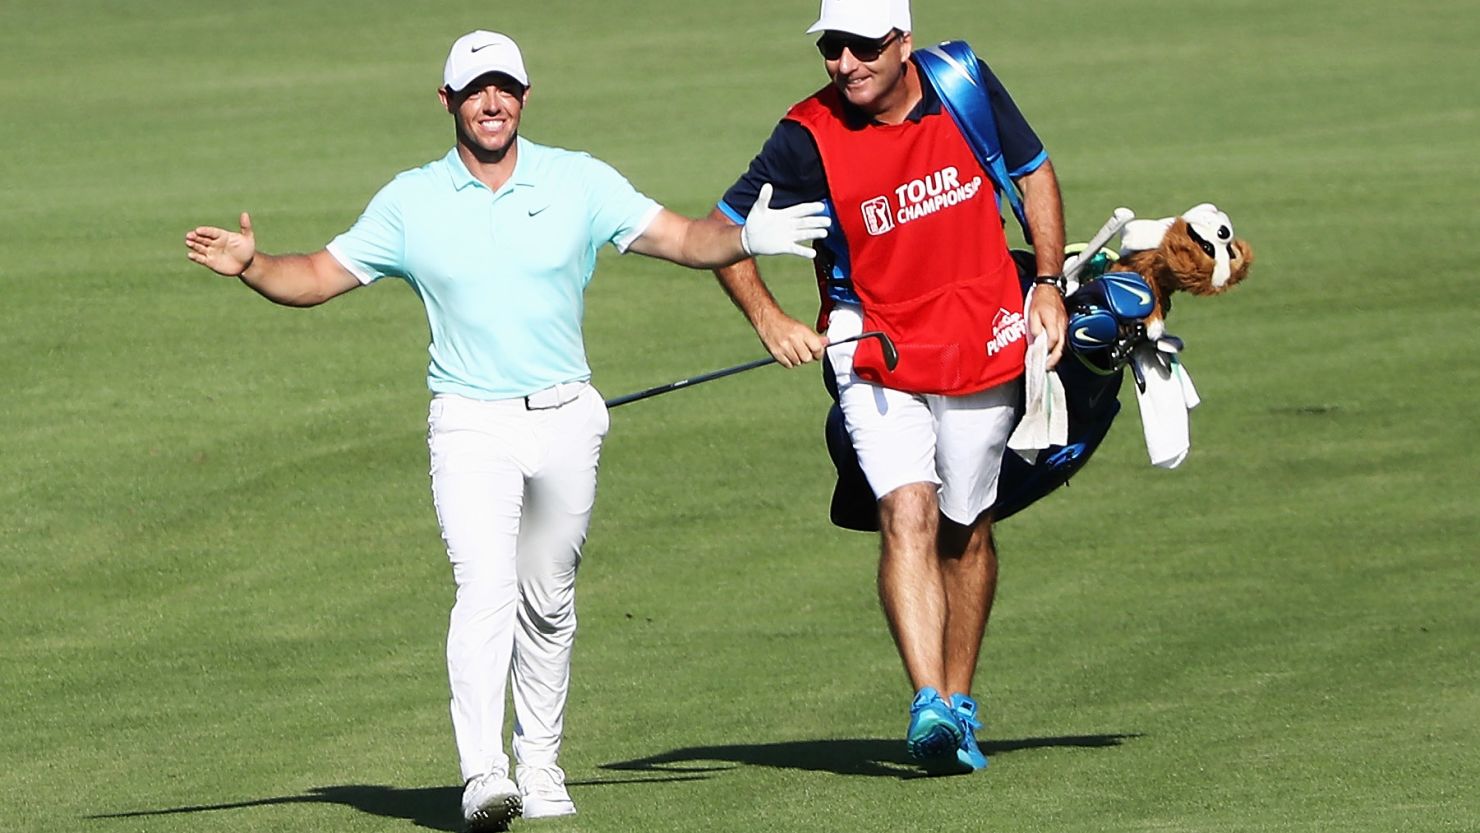 McIlroy and caddy J.P. Fitzgerald celebrate after an eagle at the Tour Championship in September.